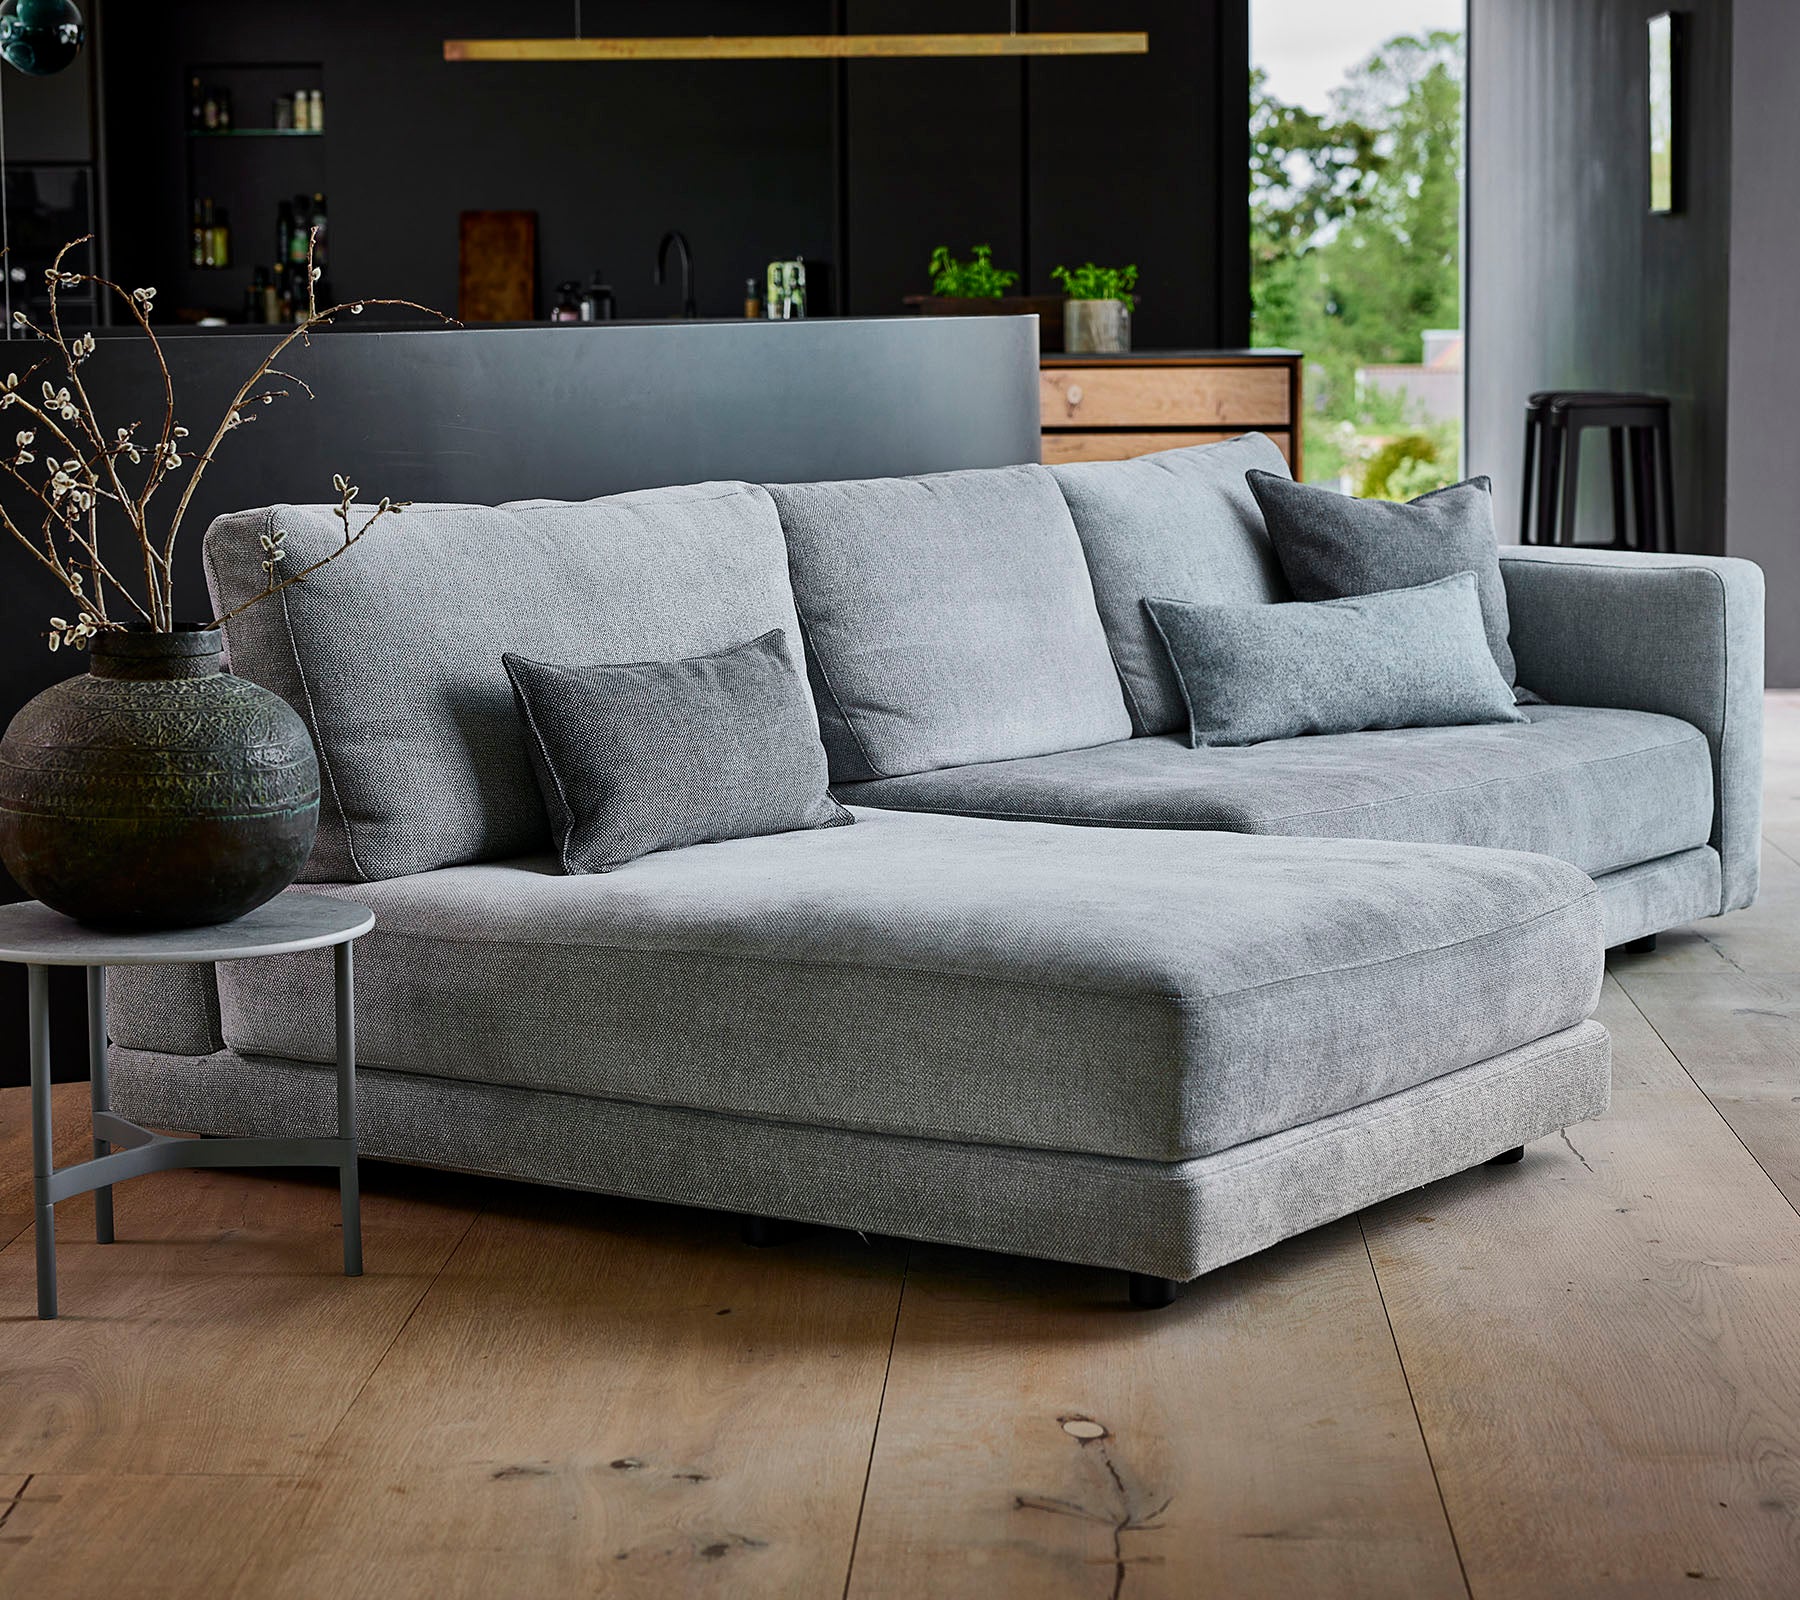 Cane-line Savannah 2-seater sofa, right module - see selection